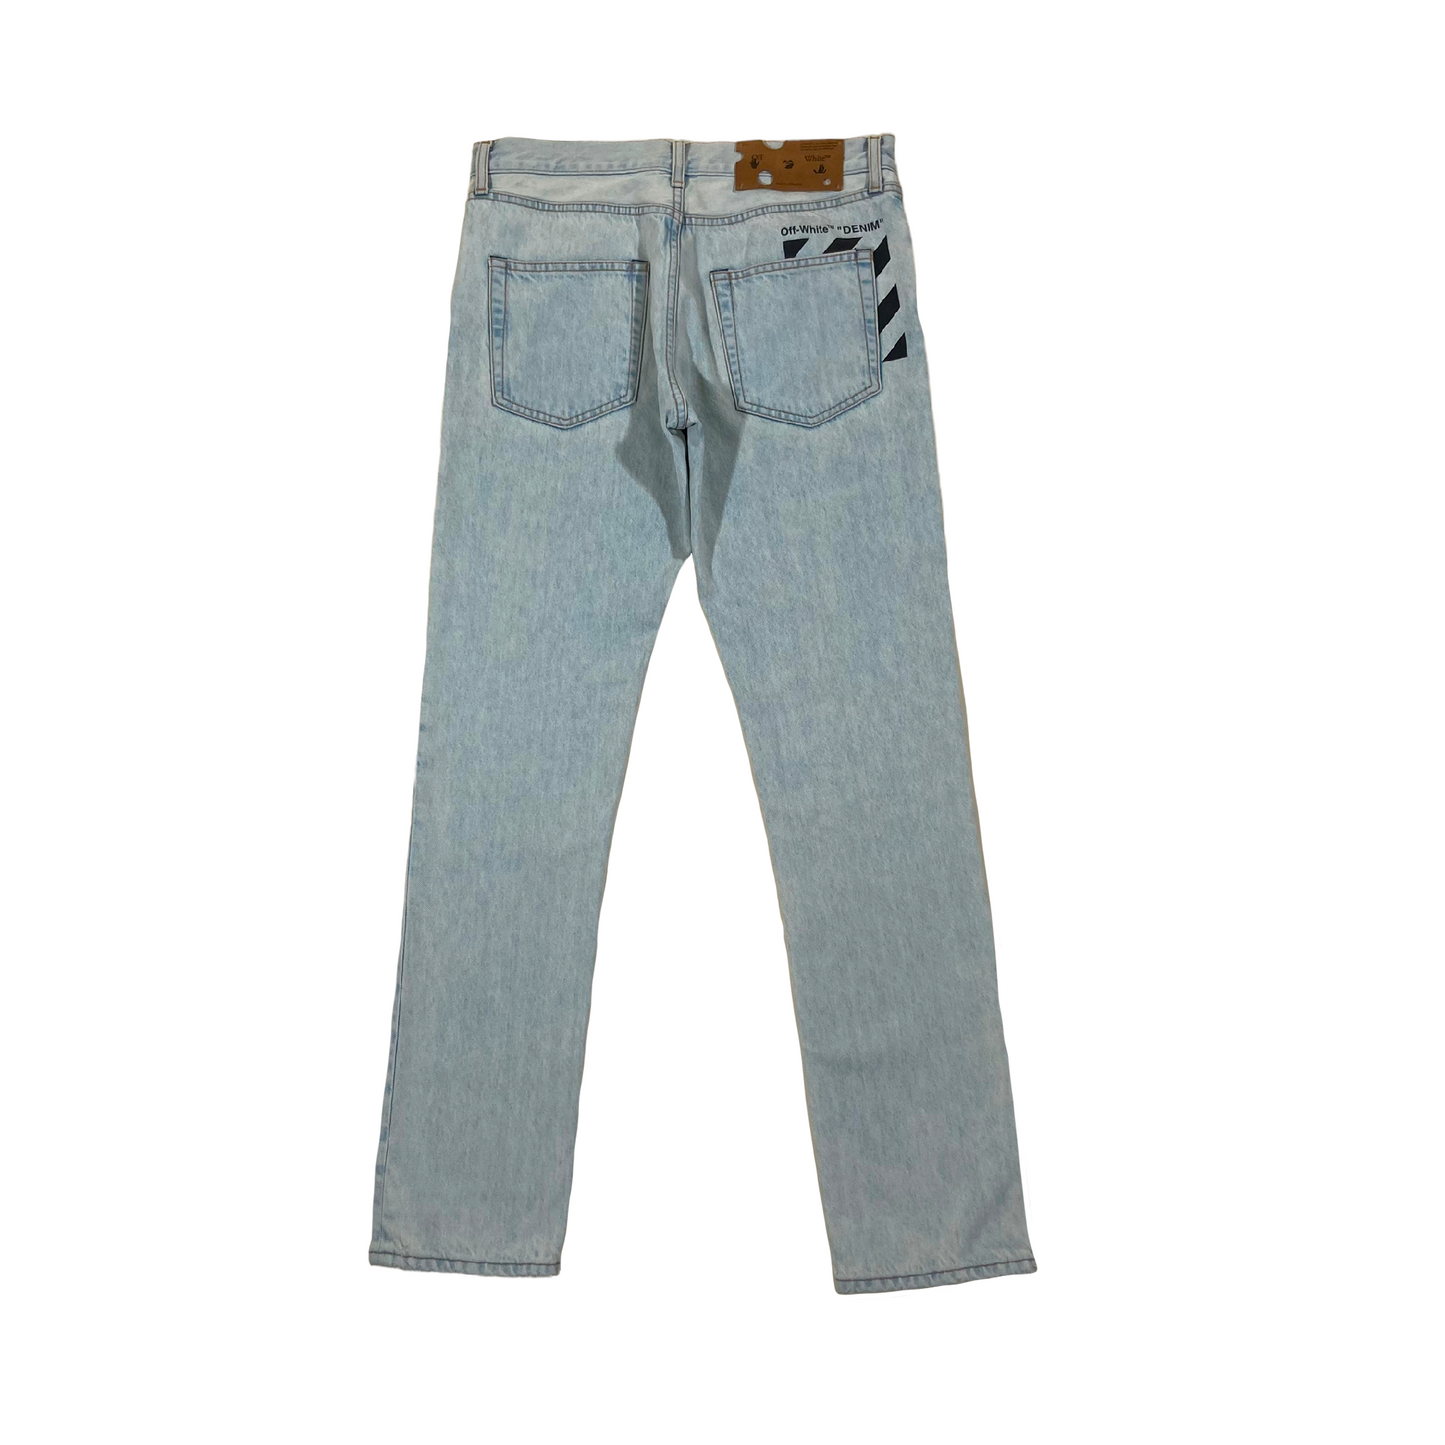 OFF-WHITE WASHED DENIM JEANS 31W